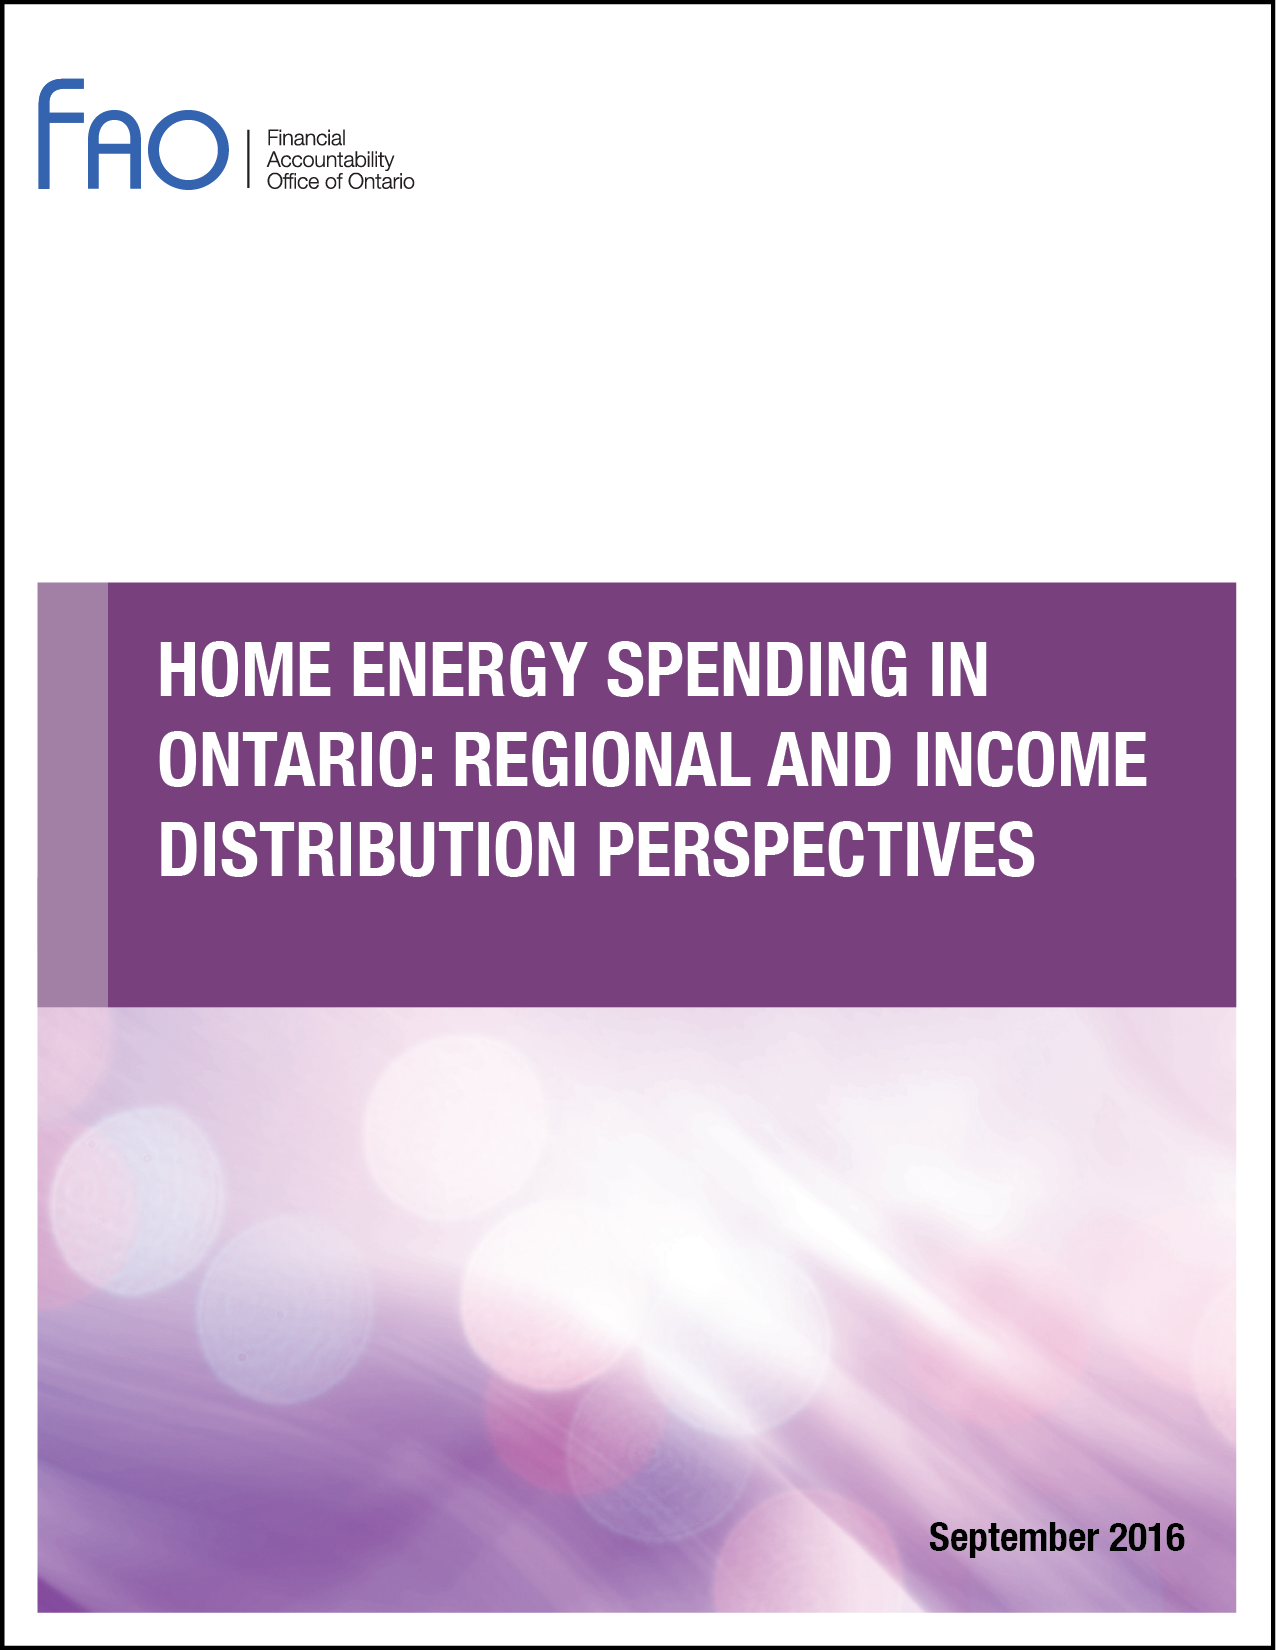 Home Energy Spending in Ontario: Regional and Income Distribution Perspectives